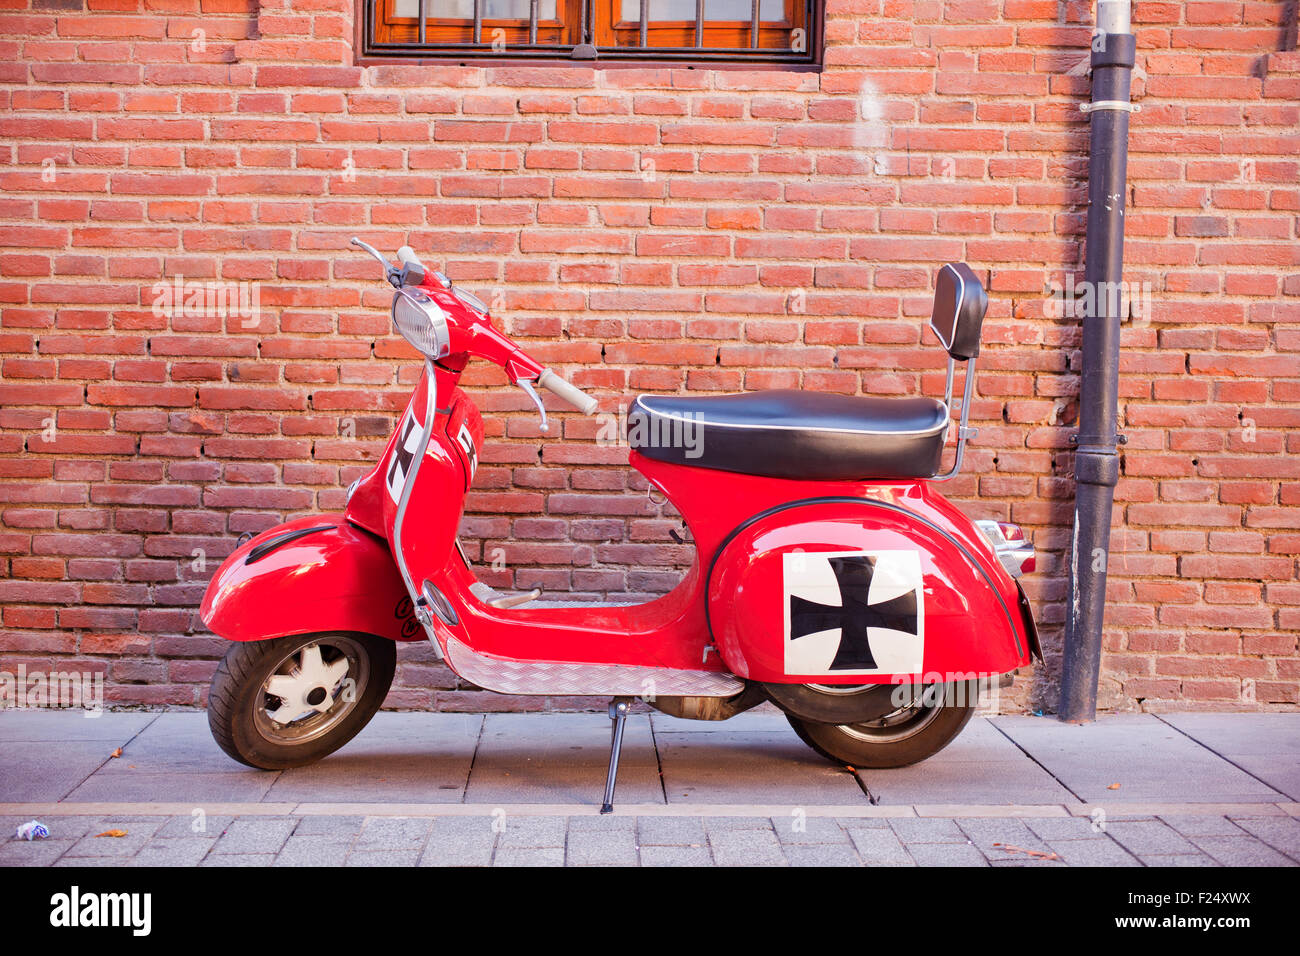 Vespa, an Italian red scooter Stock Photo